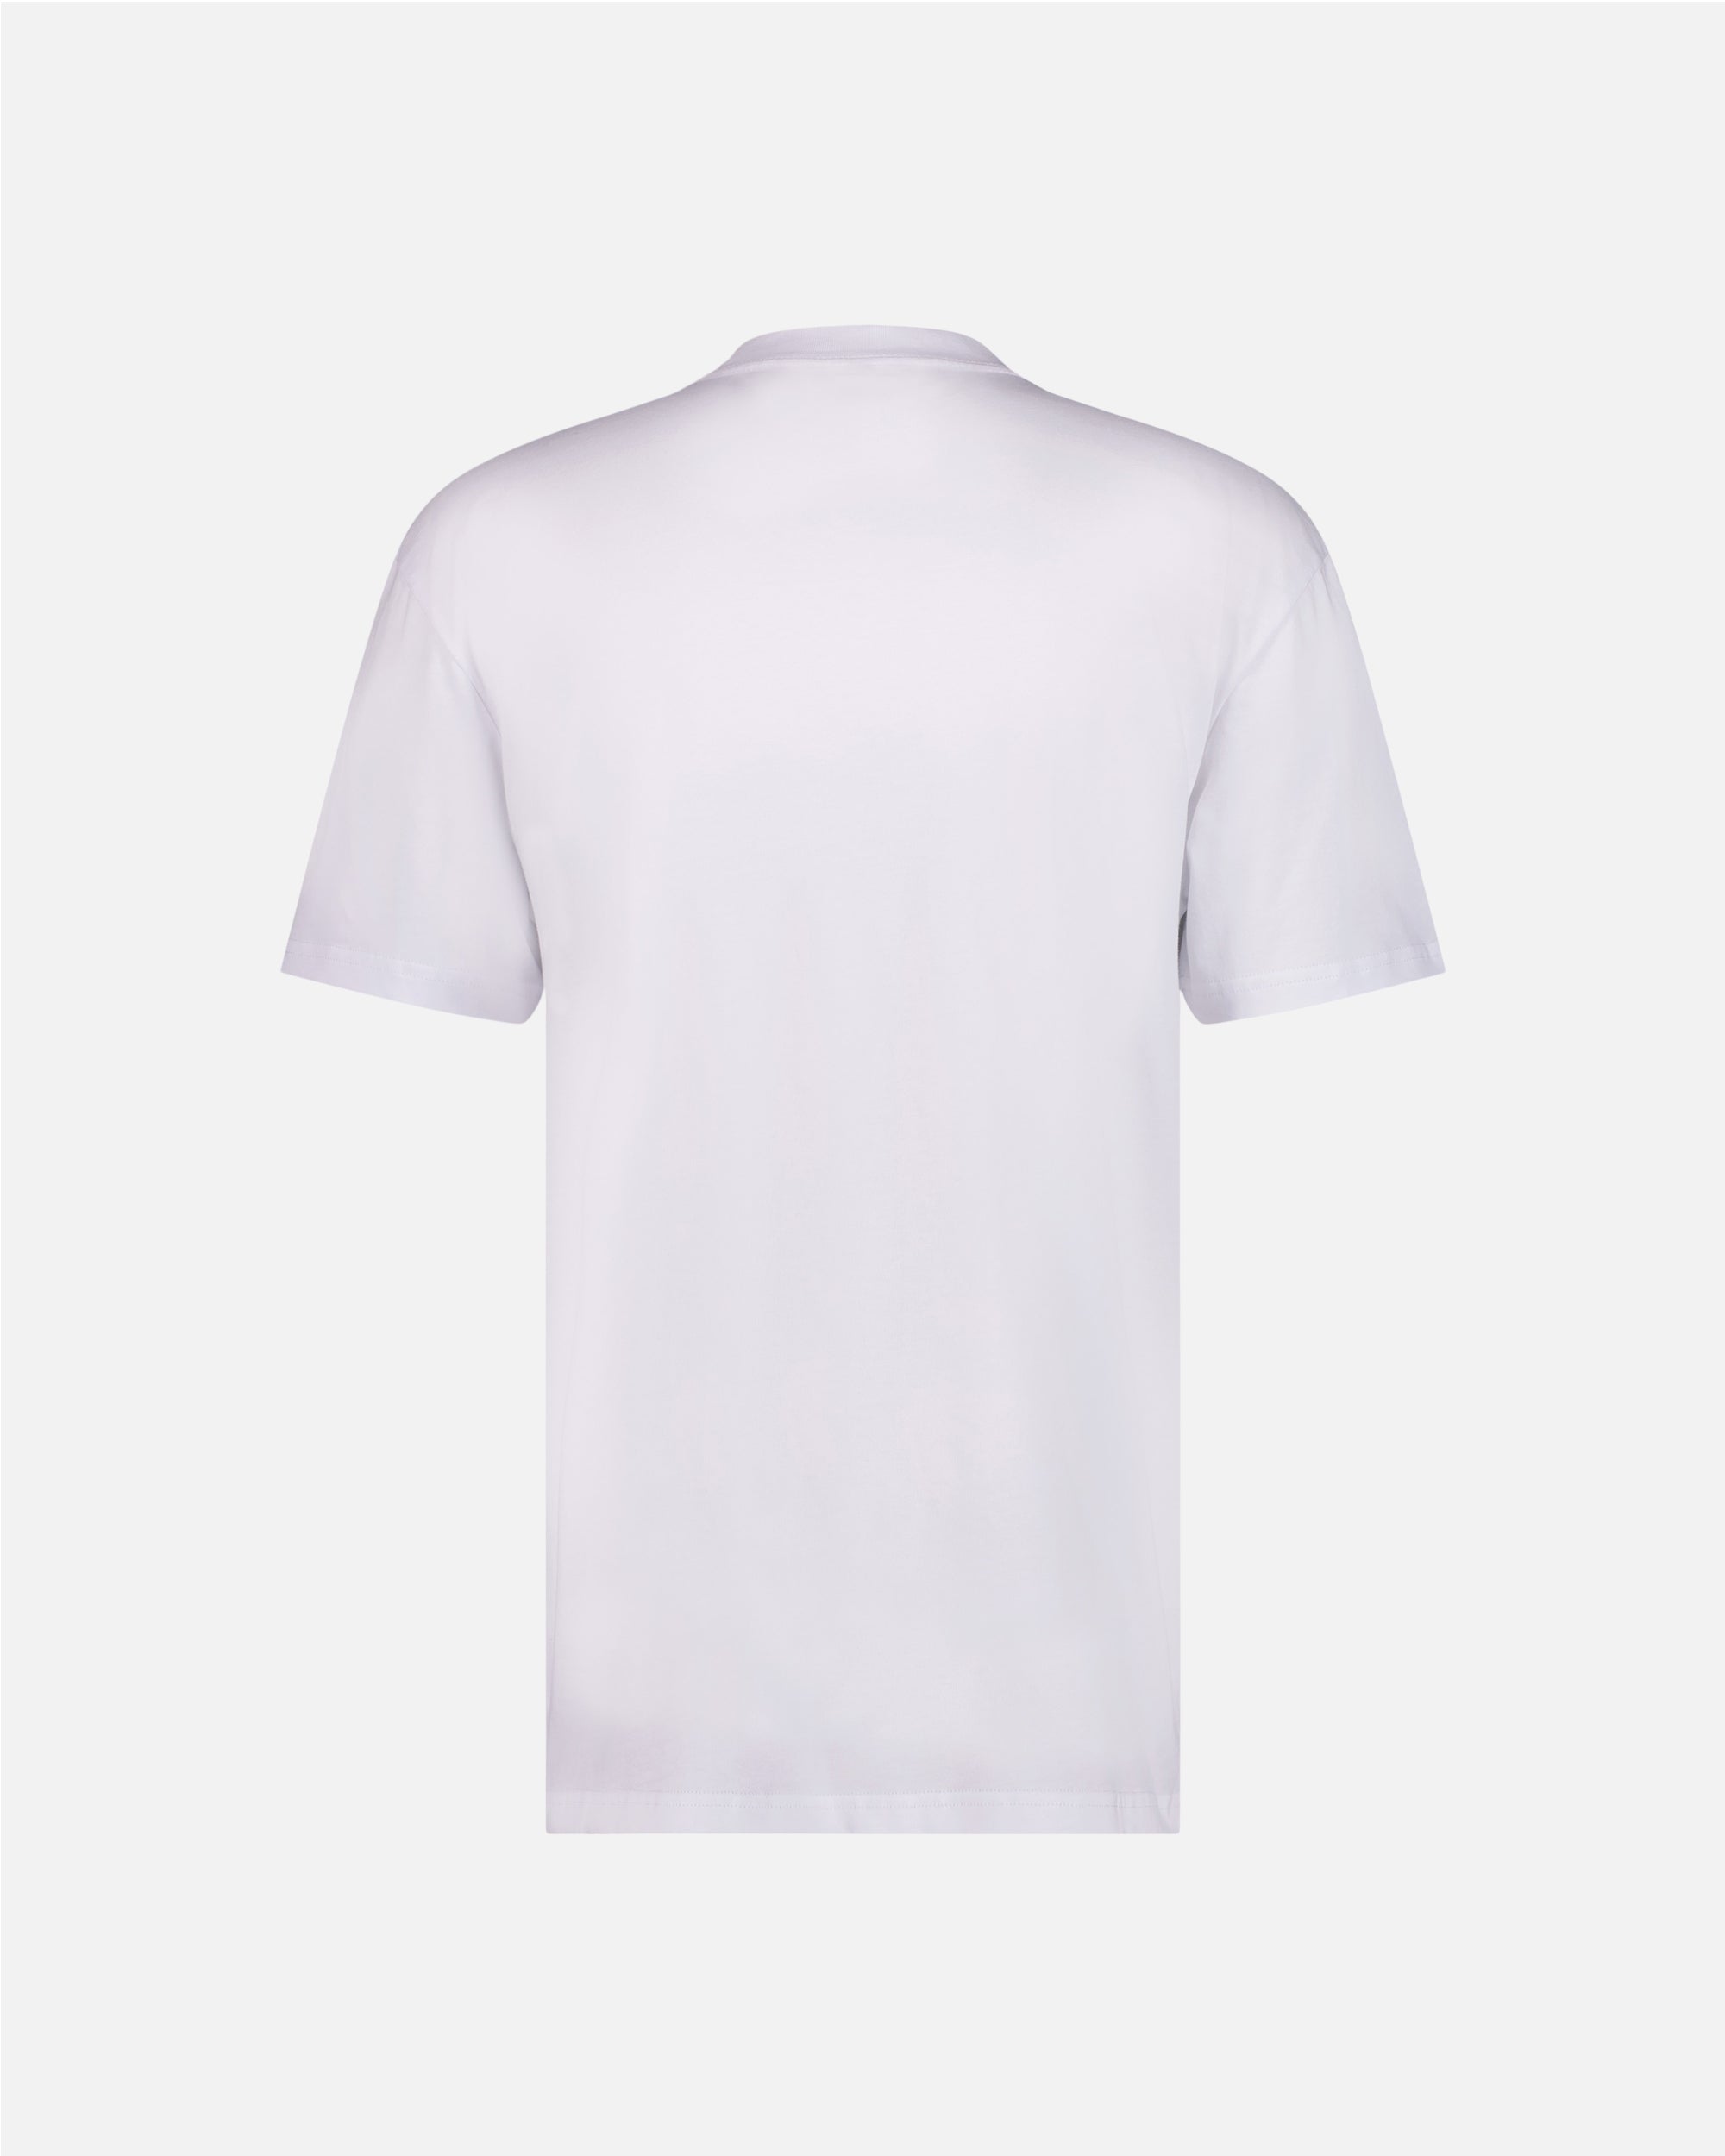 INTUNE Los Angeles Graphic Printed White Cotton T-Shirt for Men(T-Shirts), Shop Now at ShopperStop.com, India's No.1 Online Shopping Destination